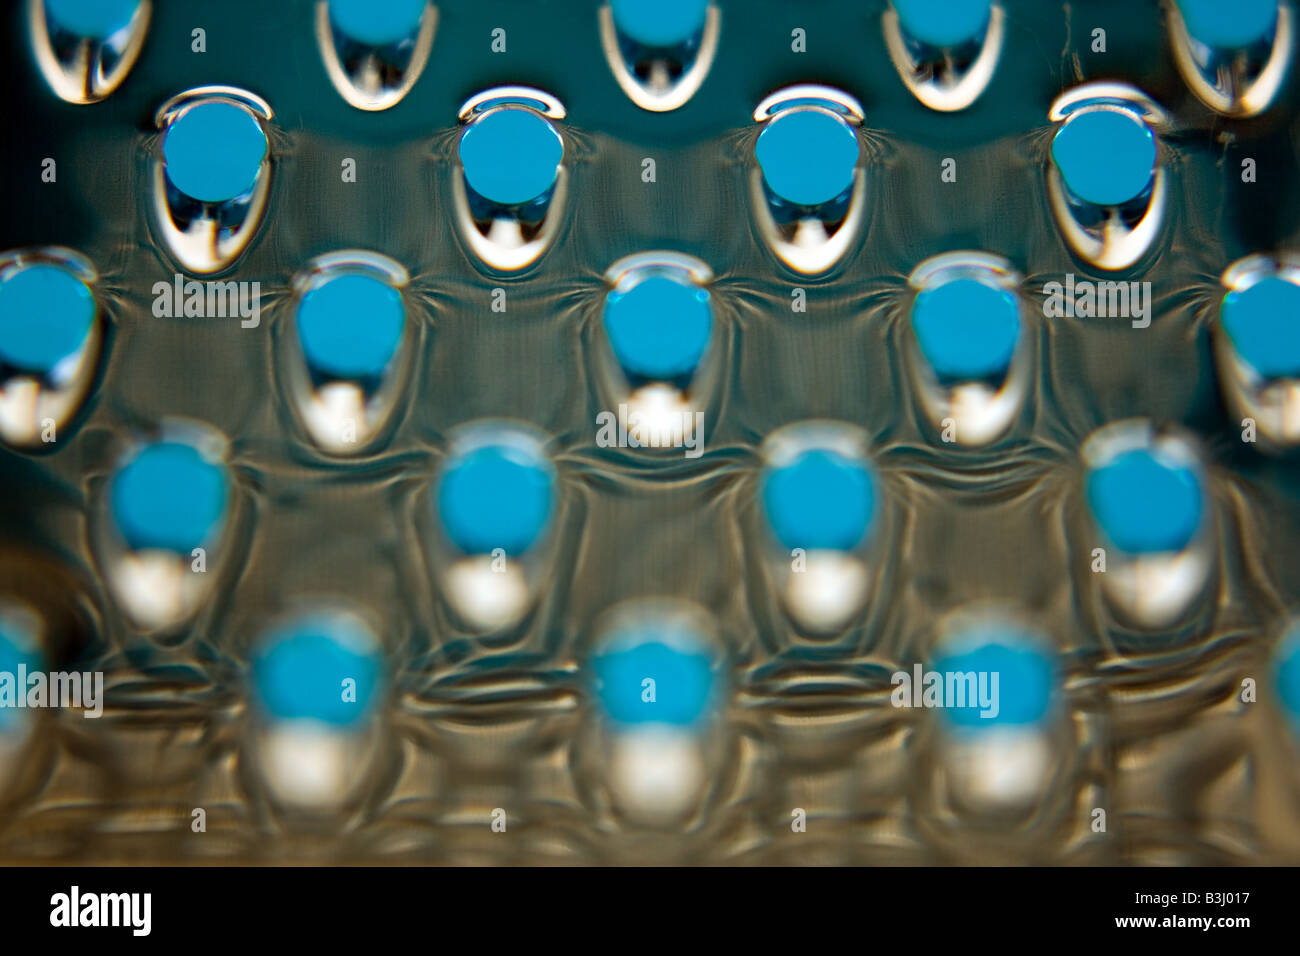 https://c8.alamy.com/comp/B3J017/abstract-close-up-of-a-cheese-grater-with-blue-backlighting-B3J017.jpg